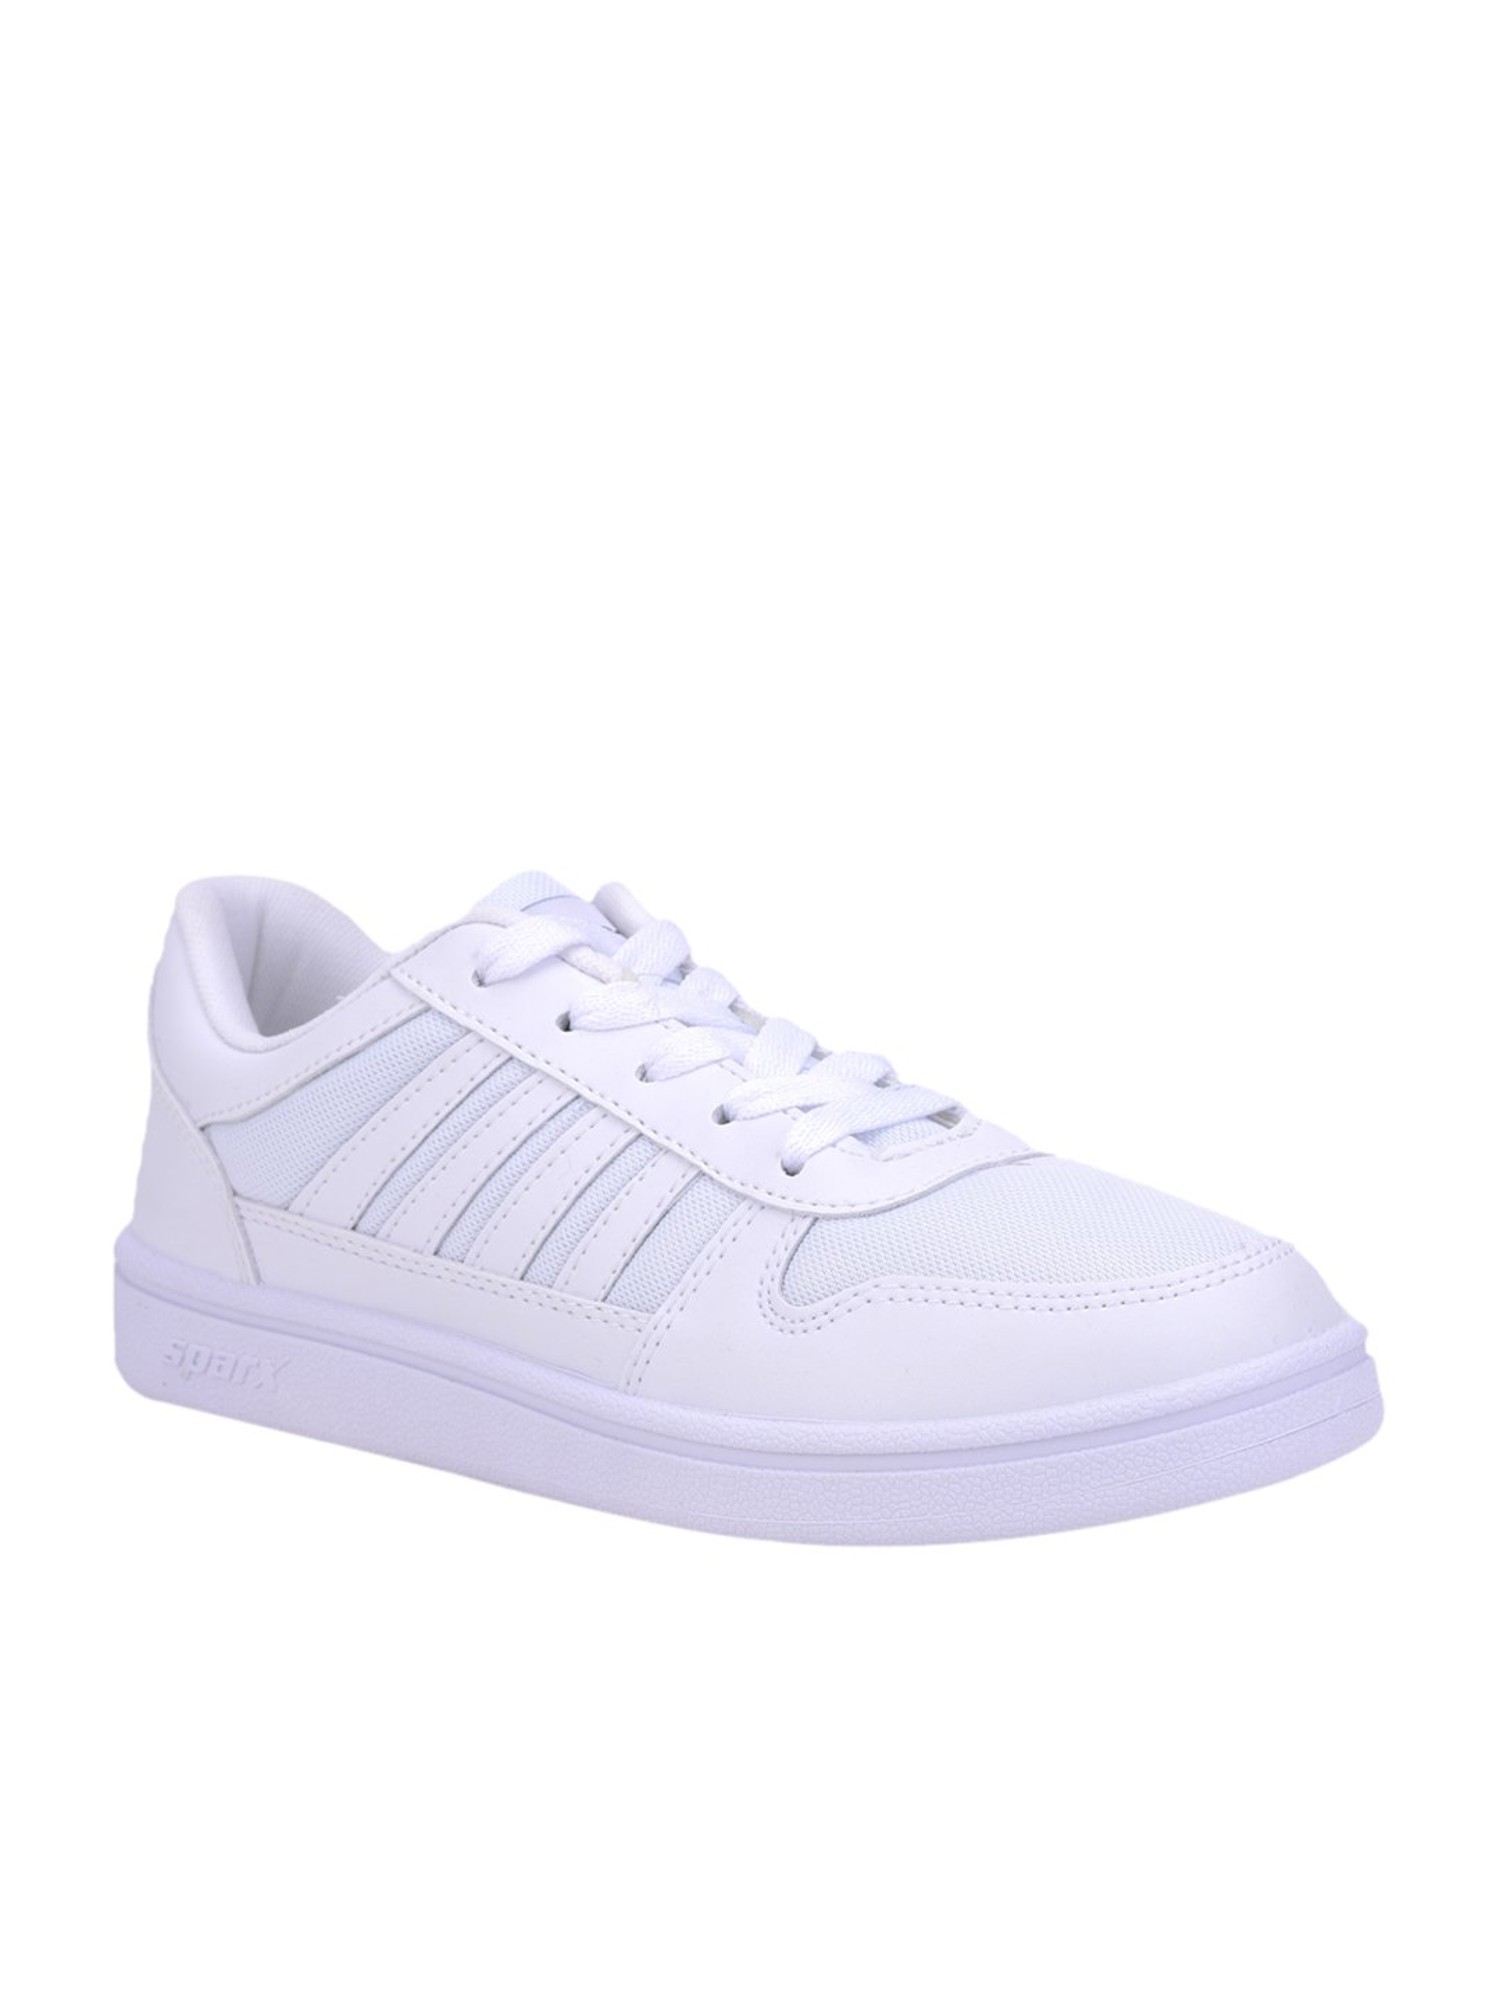 Sparx White Casual Sneakers from Sparx 